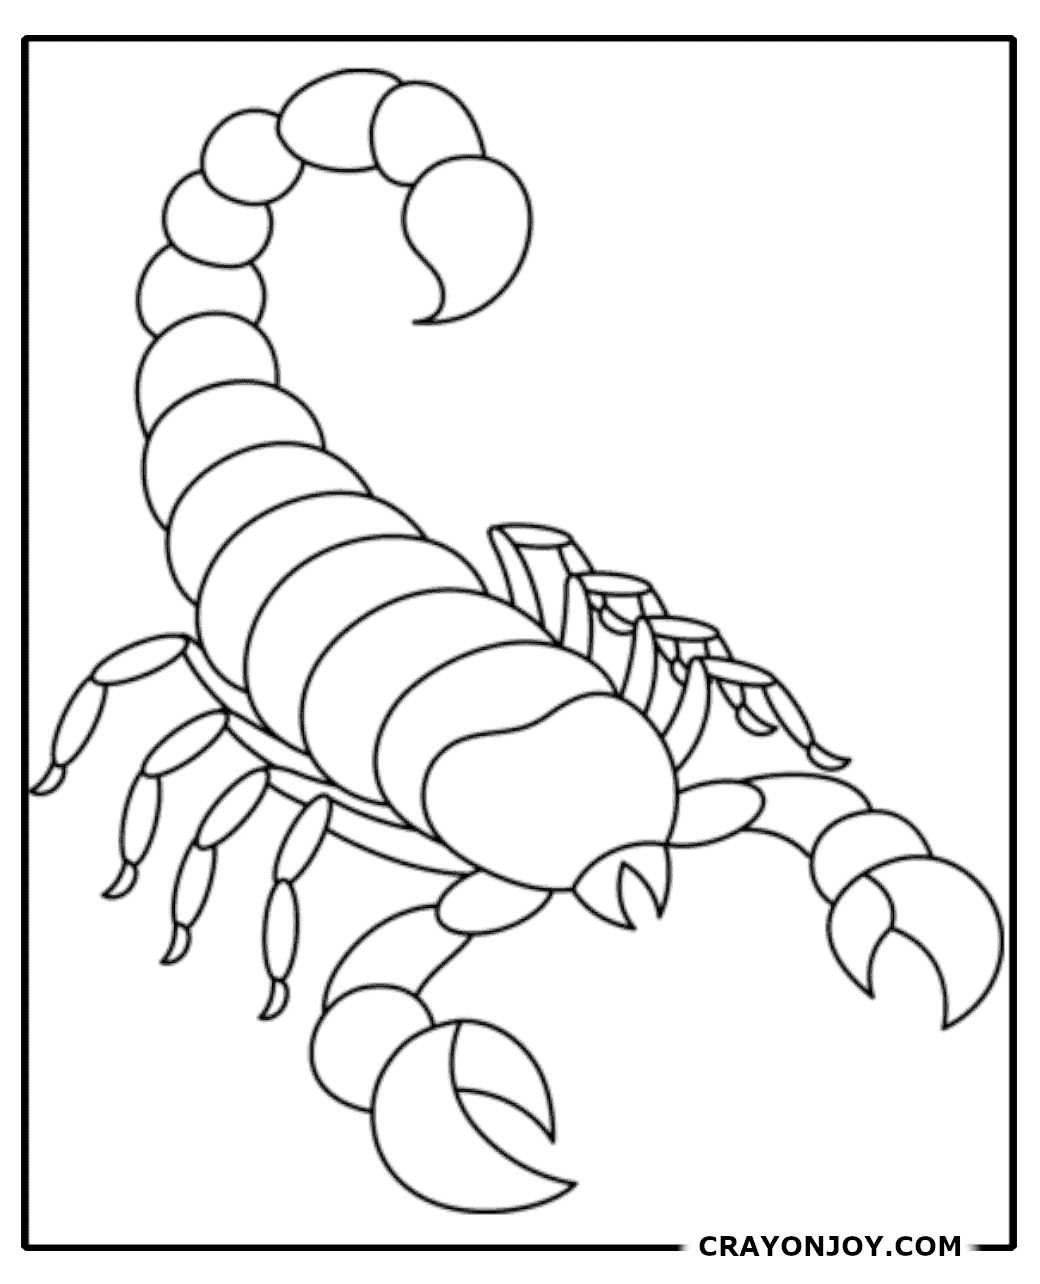 Scorpion Coloring Pages: Free Printable Designs for Kids and Adults